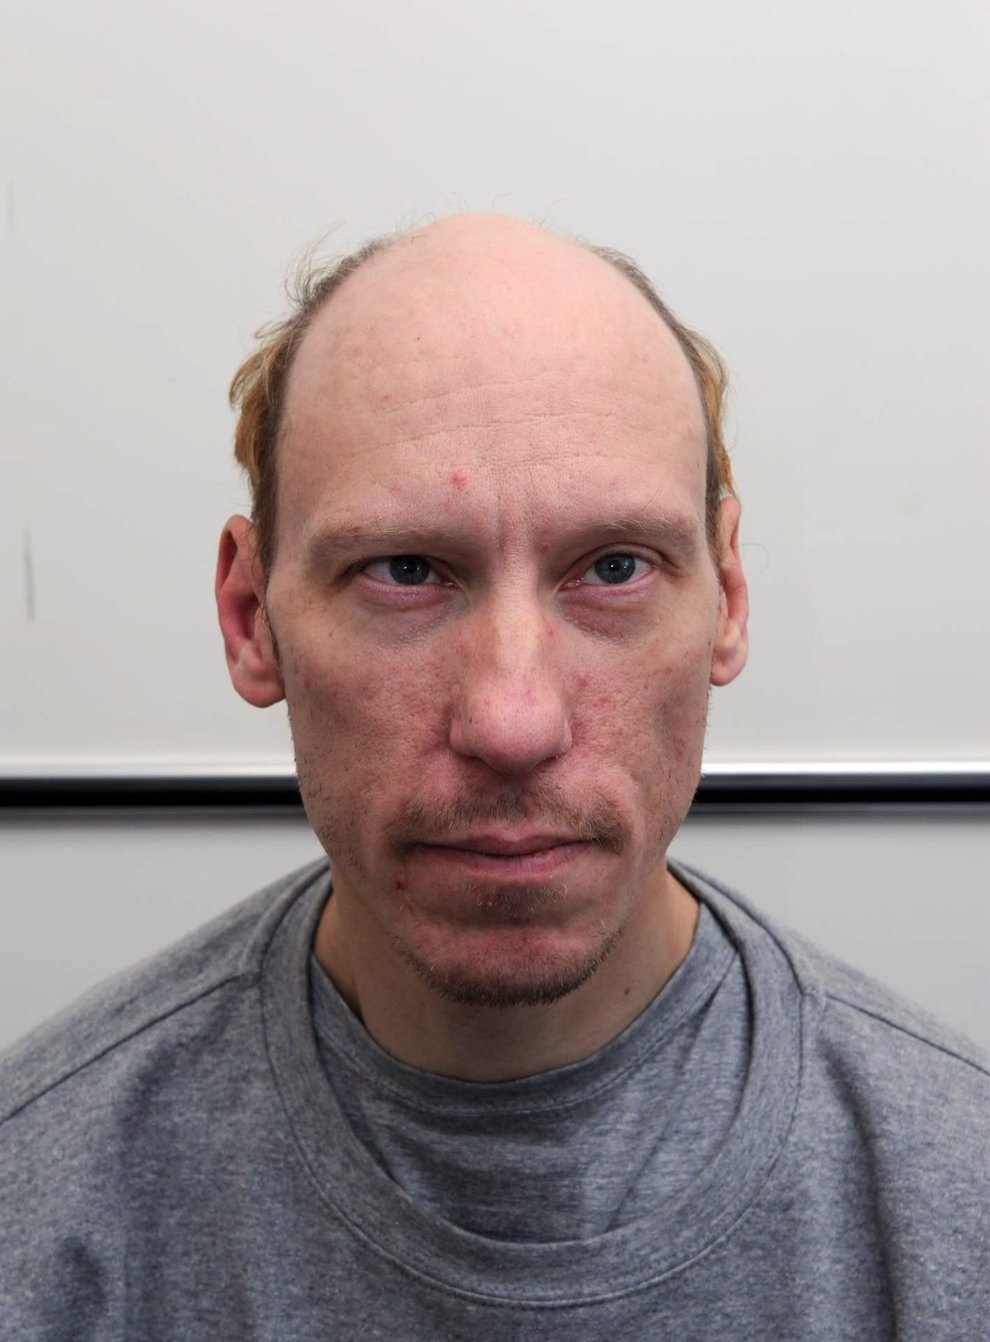 The police watchdog is to reinvestigate the Metropolitan Police over their initial handling of the murders of four young men by serial killer Stephen Port (Metropolitan Police/PA)